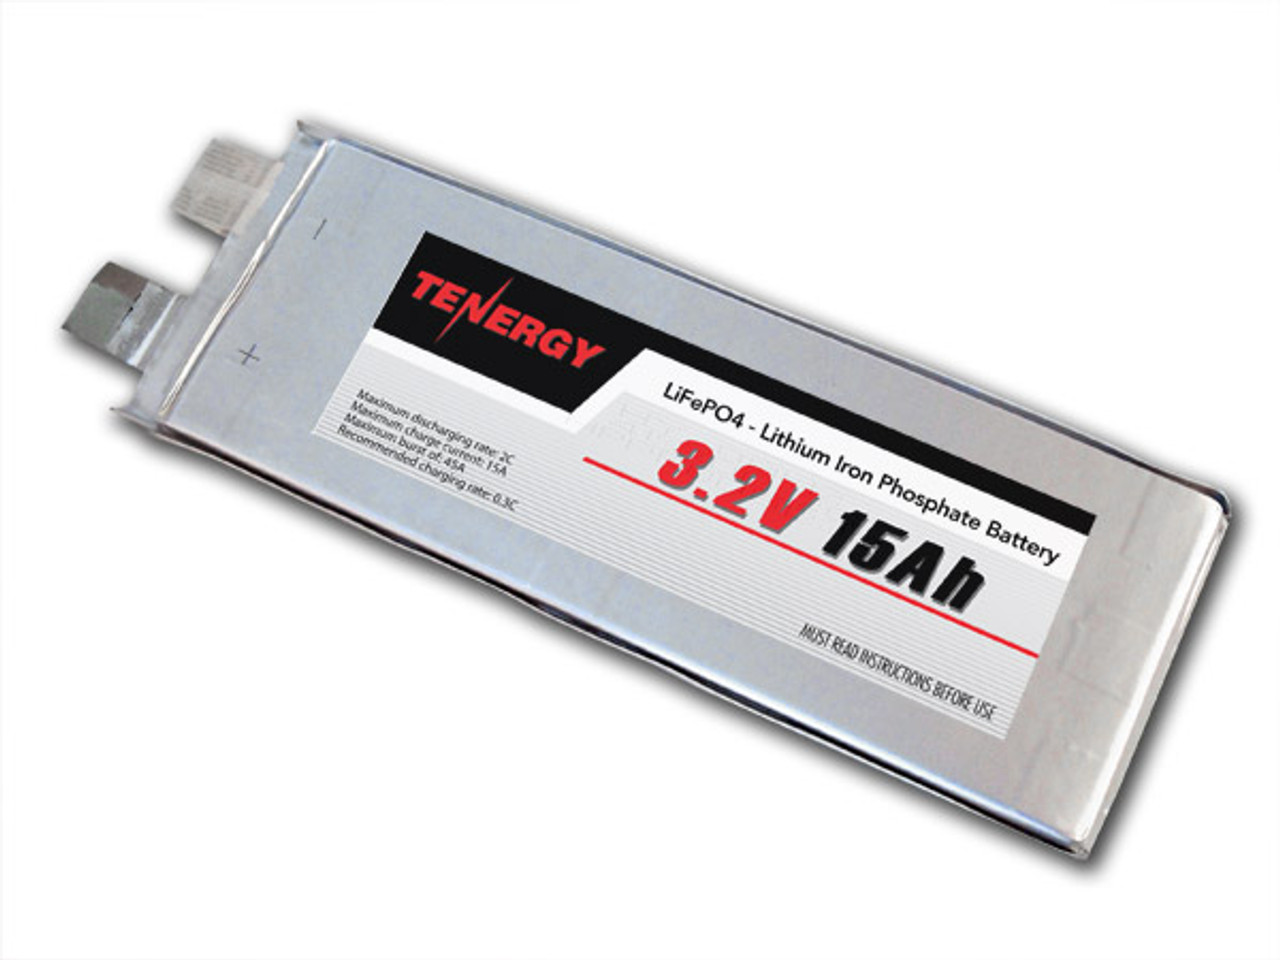 3.2V 15Ah LiFePO4 (Lithium Iron Phosphate) Rechargeable Battery (DGR-A) With UL 1642, IEC 62133, UN 38.3 Certification